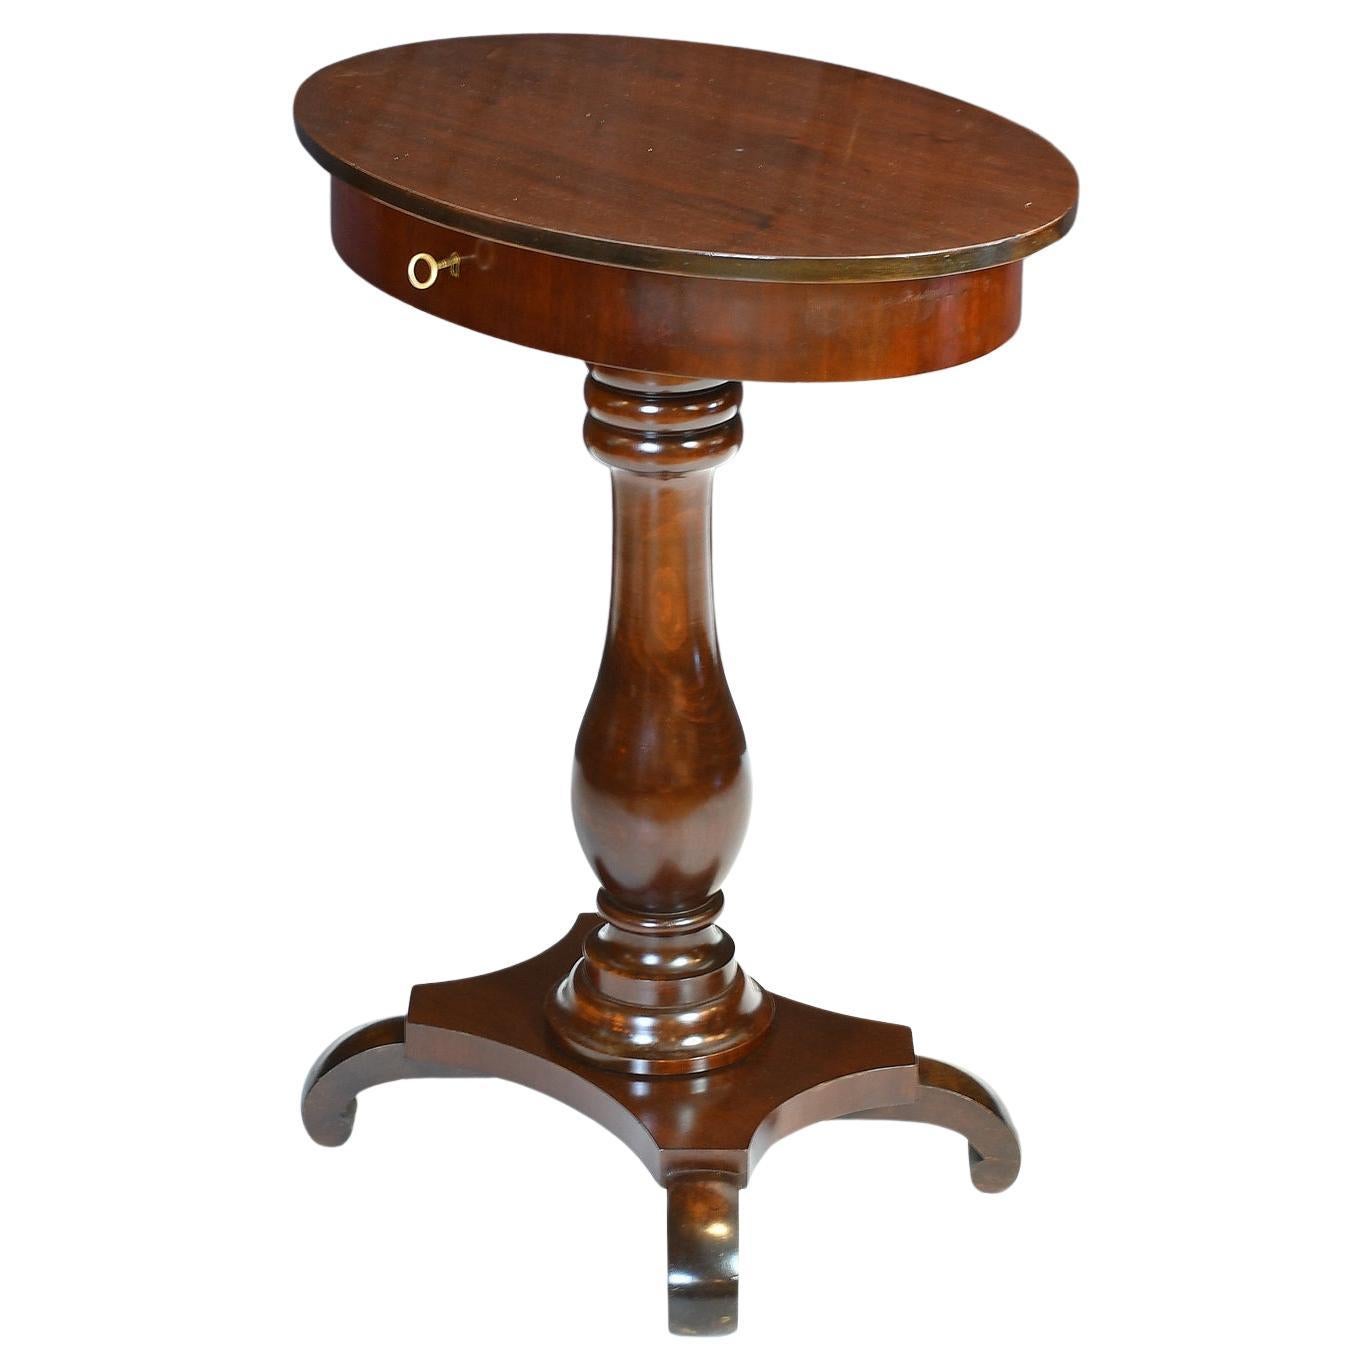 Danish Small Antique Oval Pedestal Table or Work Table in Dark-Stained Mahogany For Sale